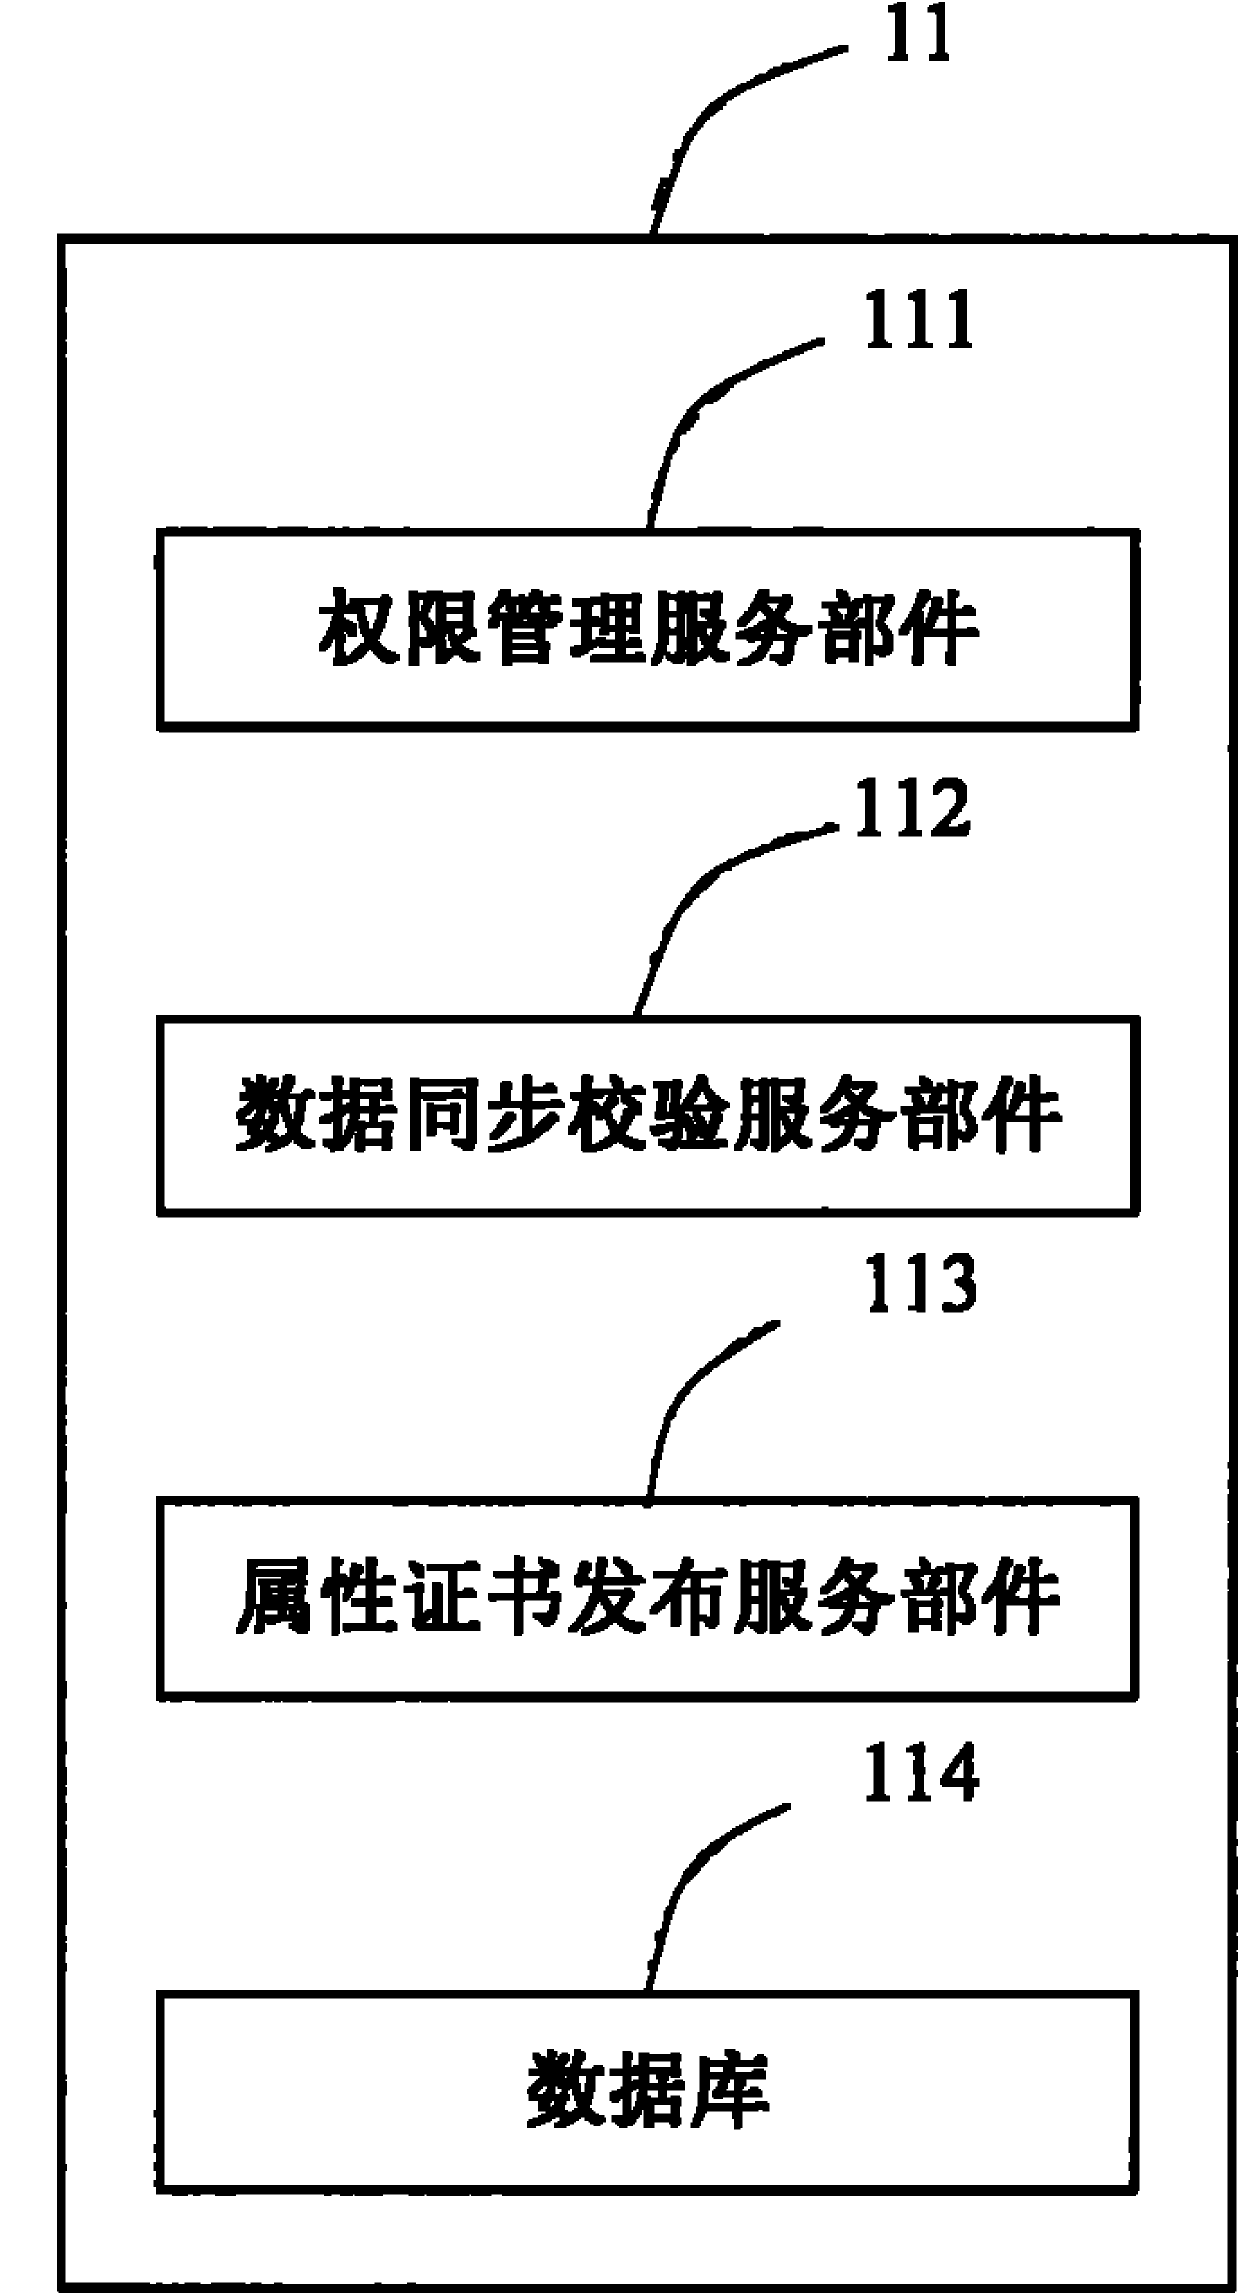 Distributed authorization management system and implementation method thereof